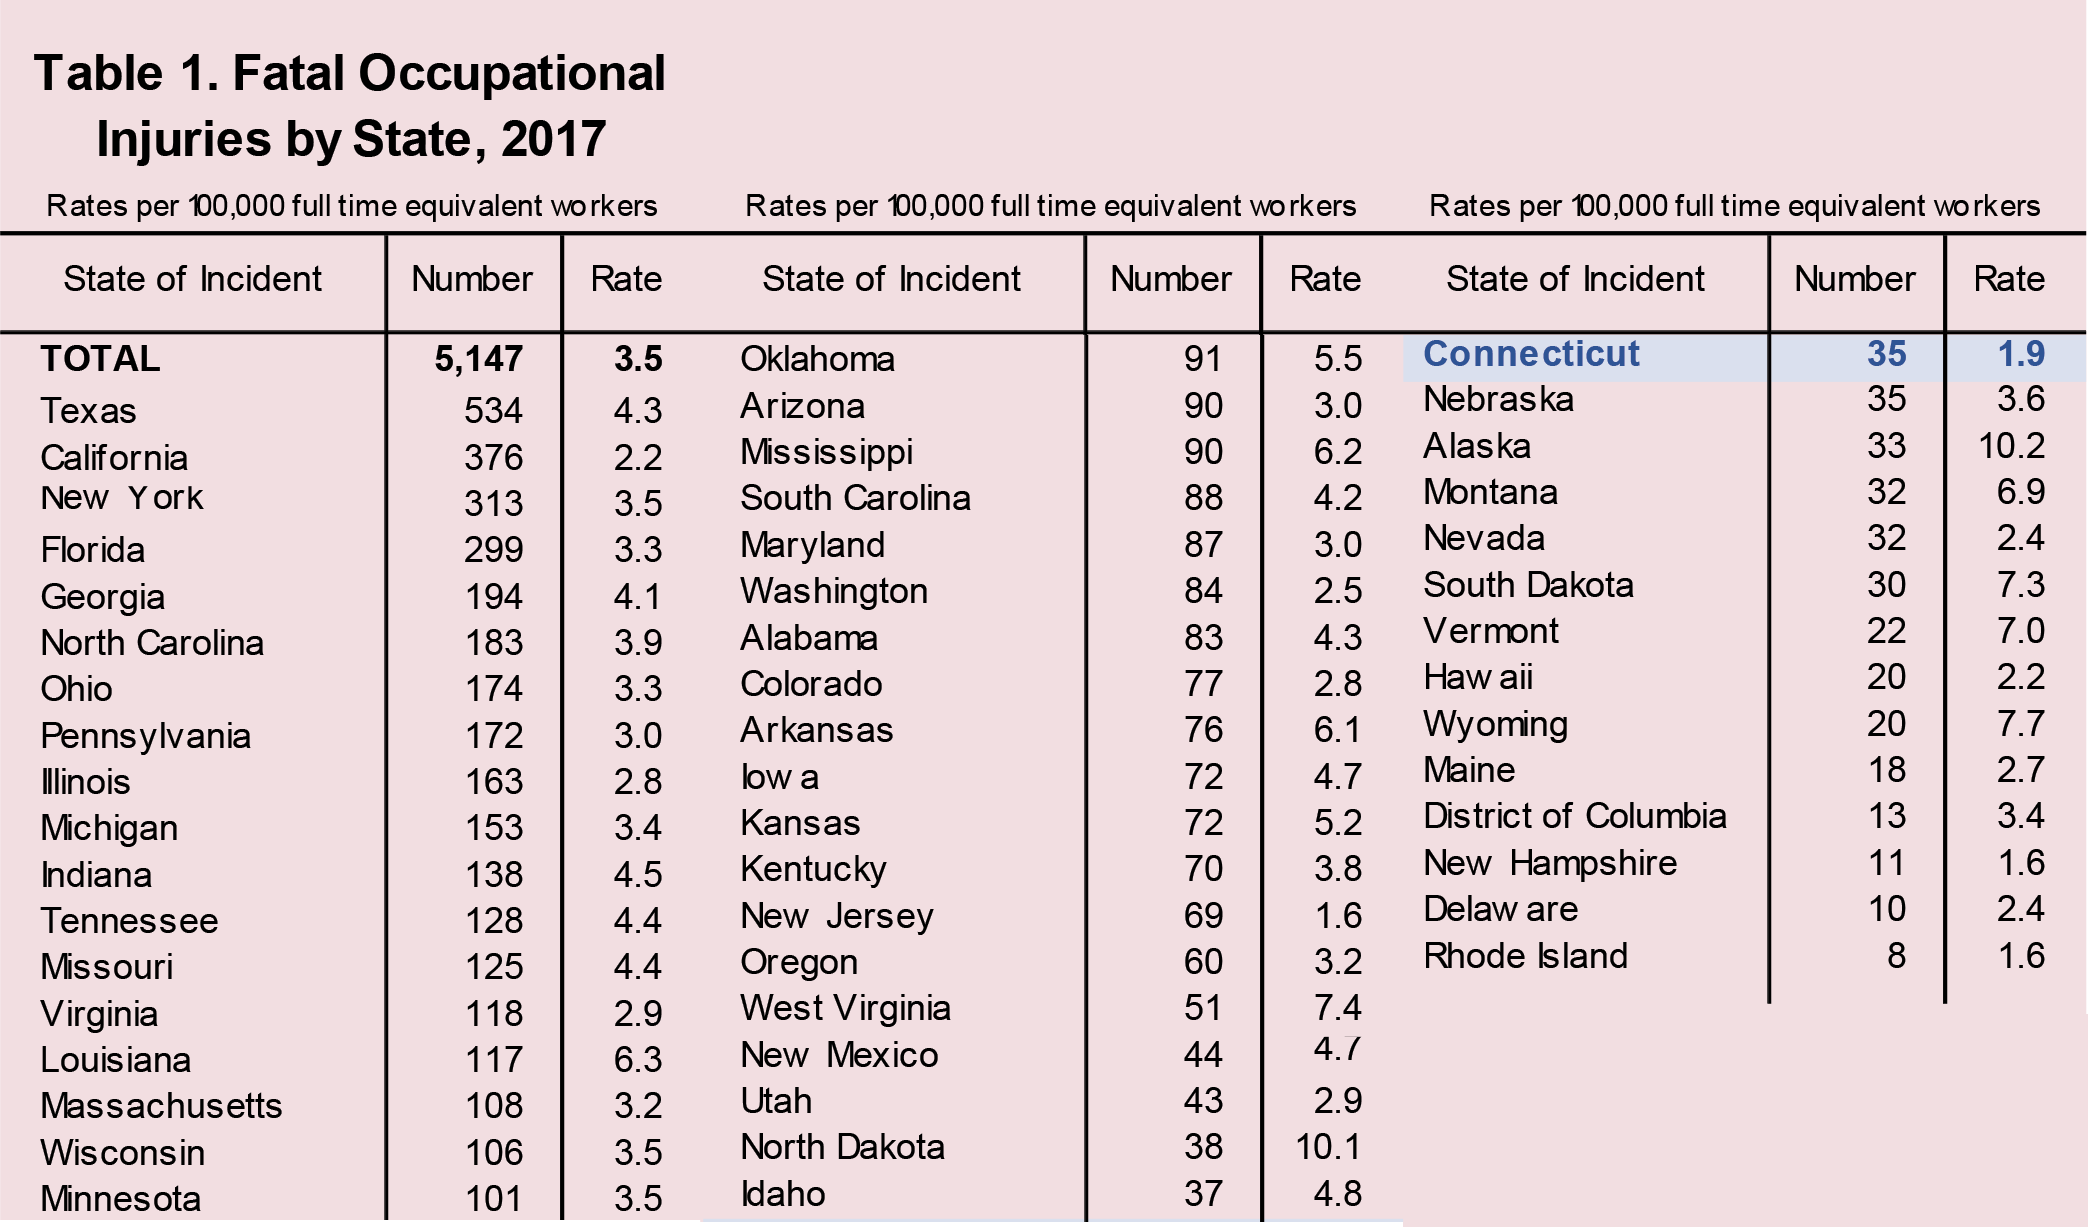 Table 1. Fatal Occupational Injuries by State, 2017